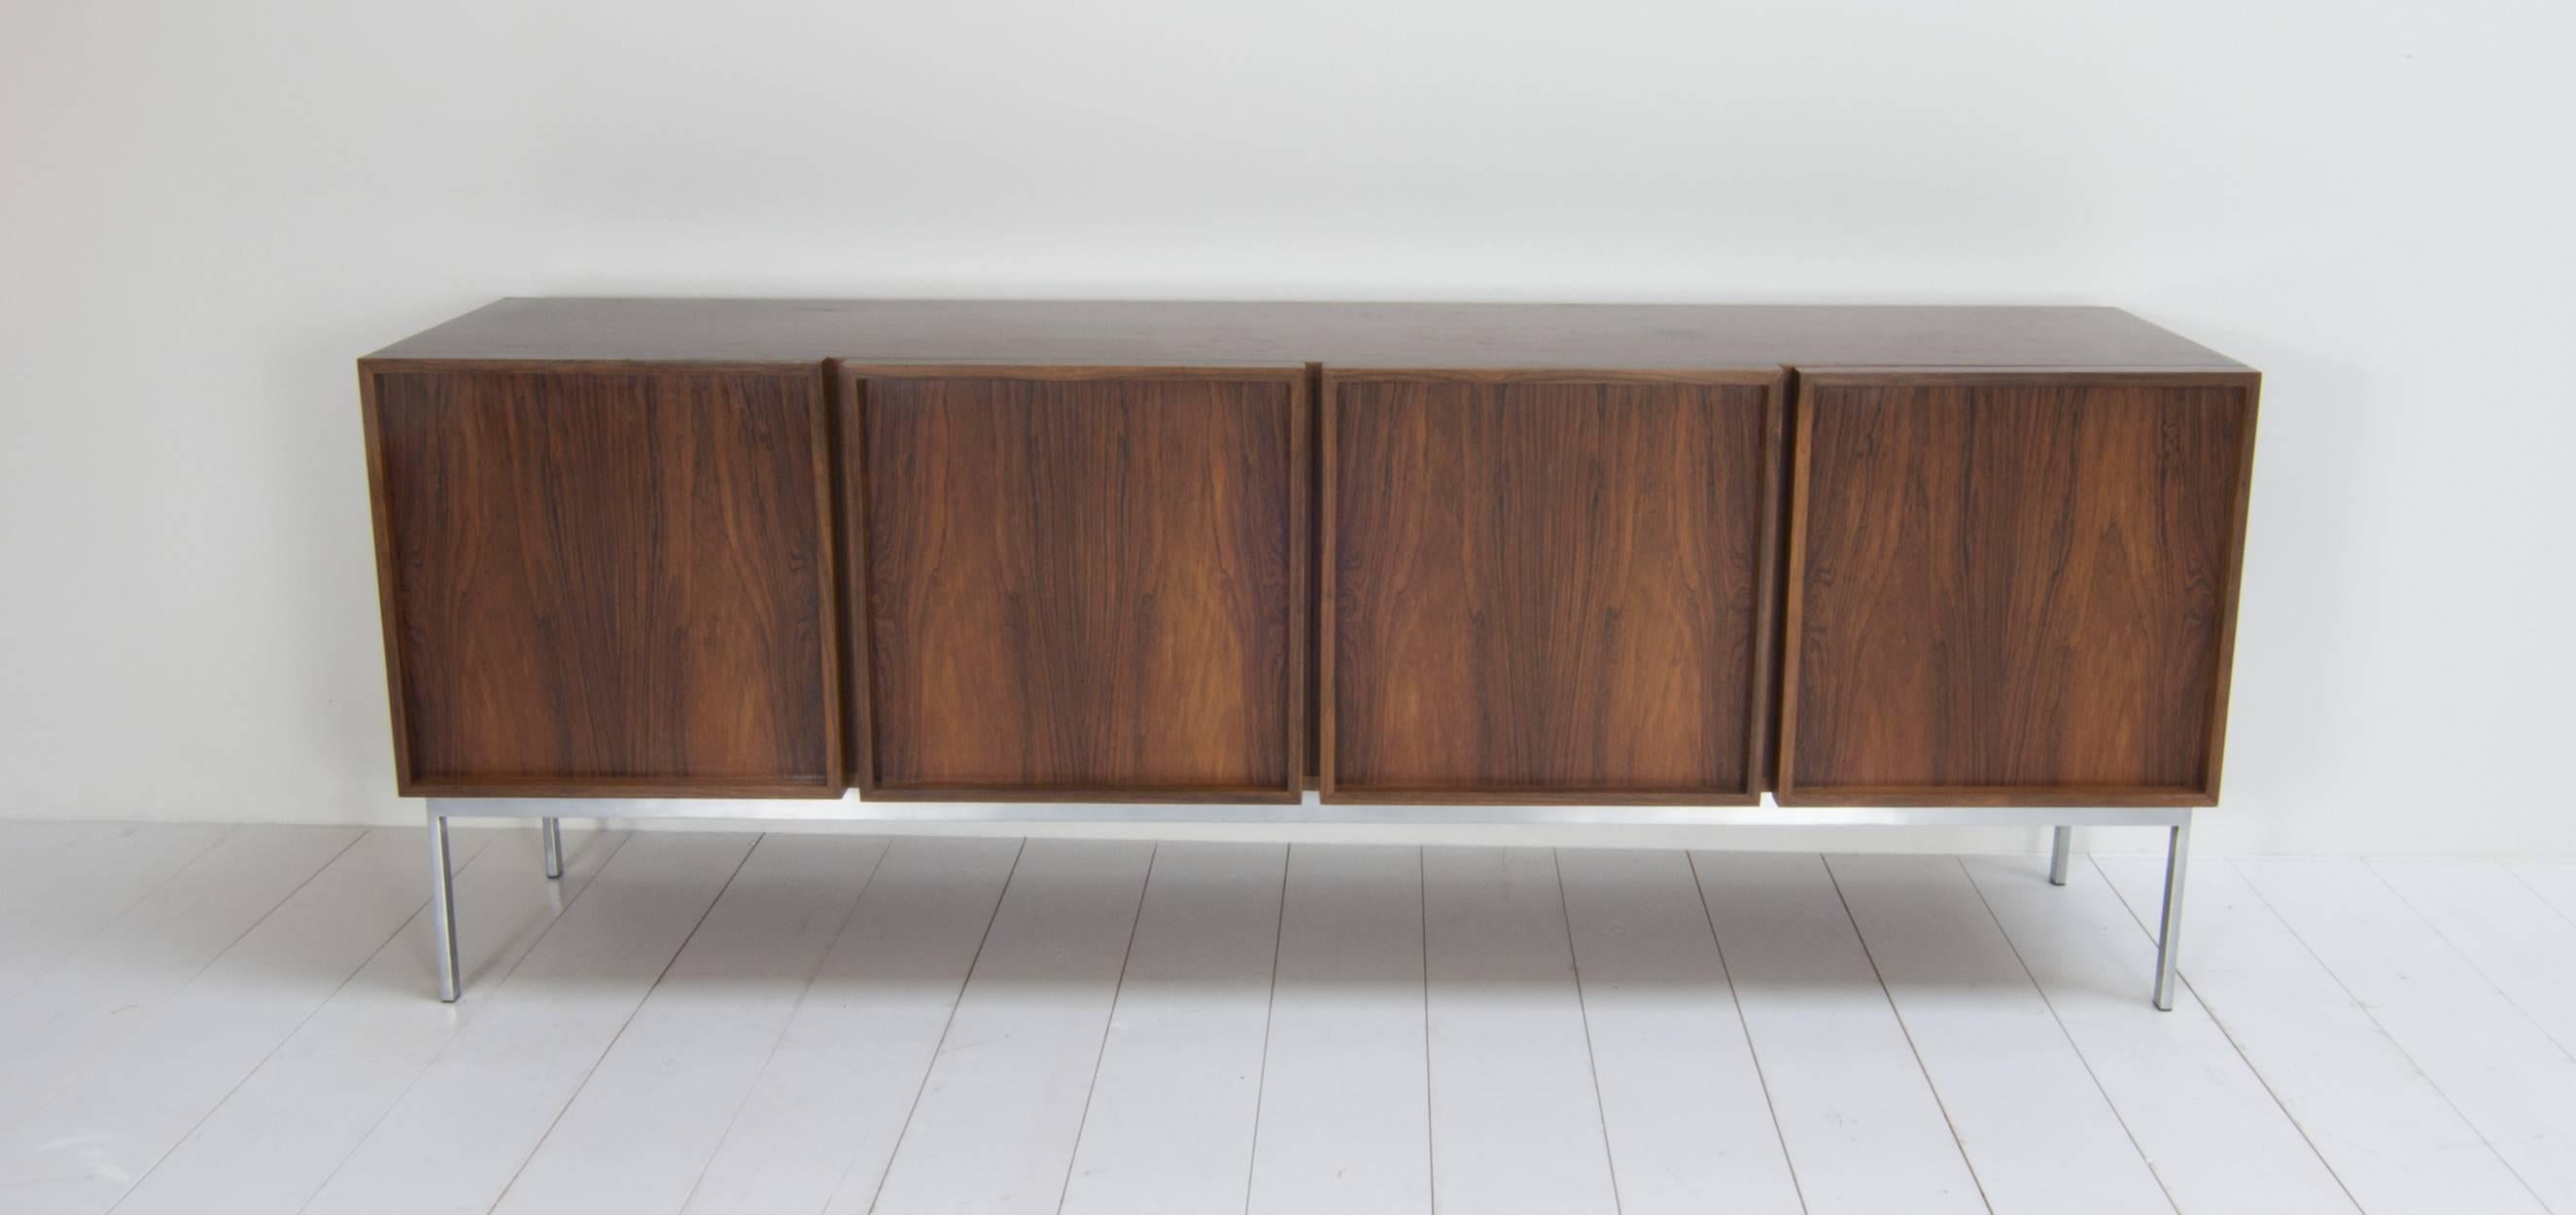 Renz sideboard designed by Walter Wirz in the 1960s. The Renz sideboard is produced by Wilhelm Renz in Germany. The outside of this dresser is made of rosewood, the inside of oak and the chassis is made of chromed steel.

Renz sideboard; modern and